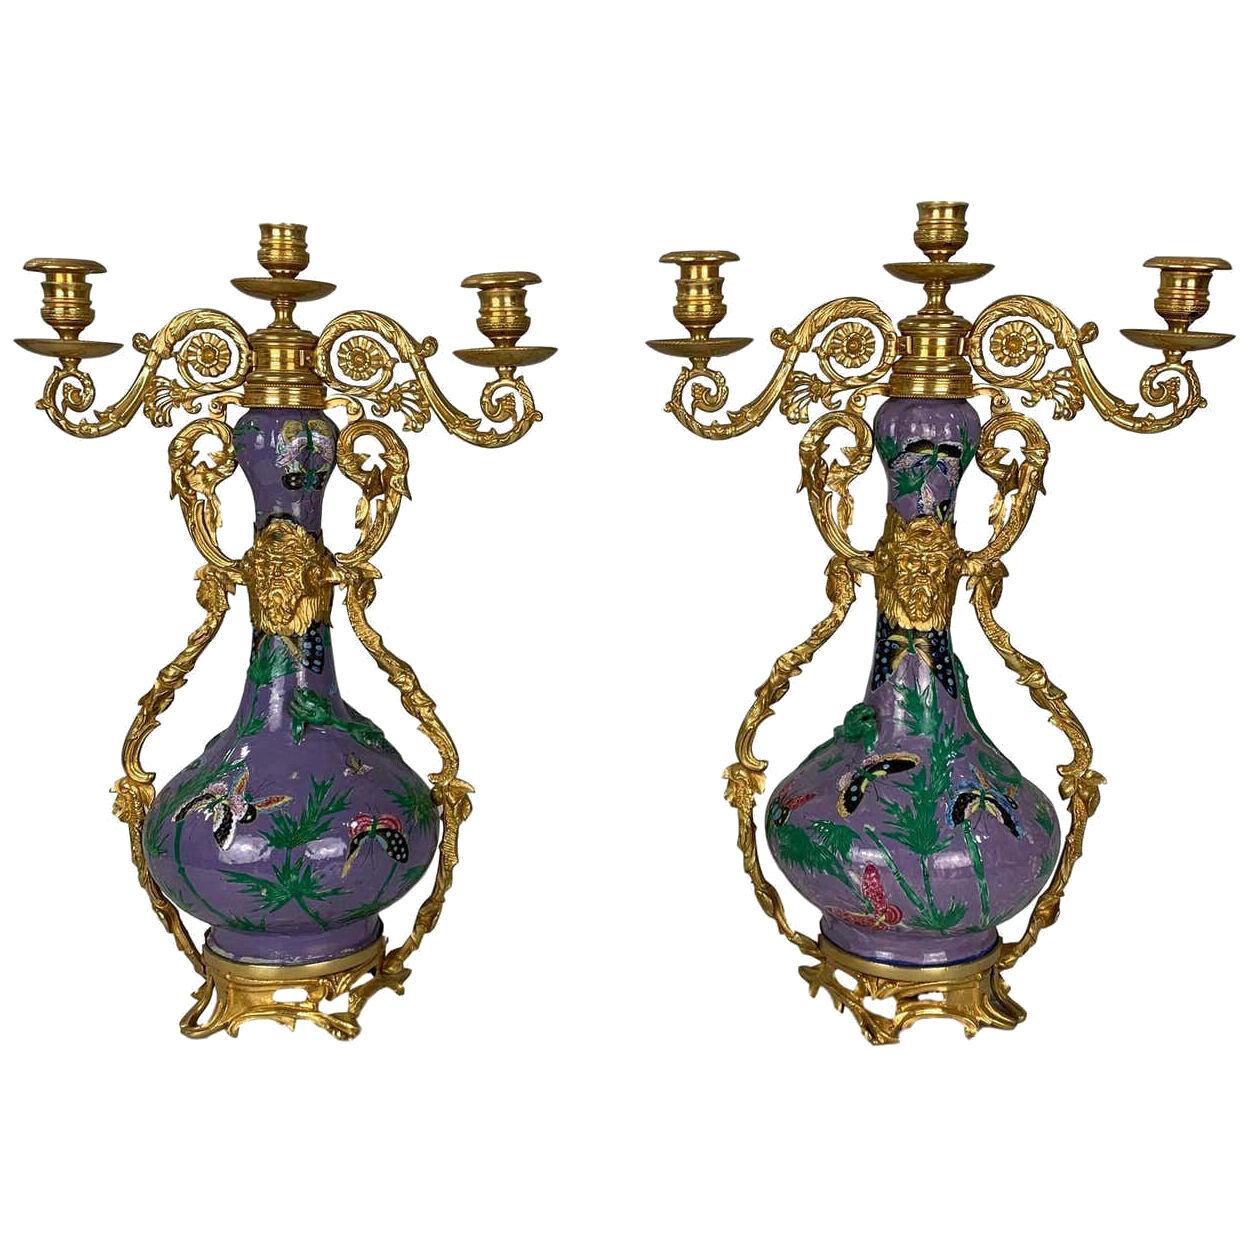 Pair of Bronze Ormolu-Mounted Chinese Export Porcelain Vases, Qing Dynasty